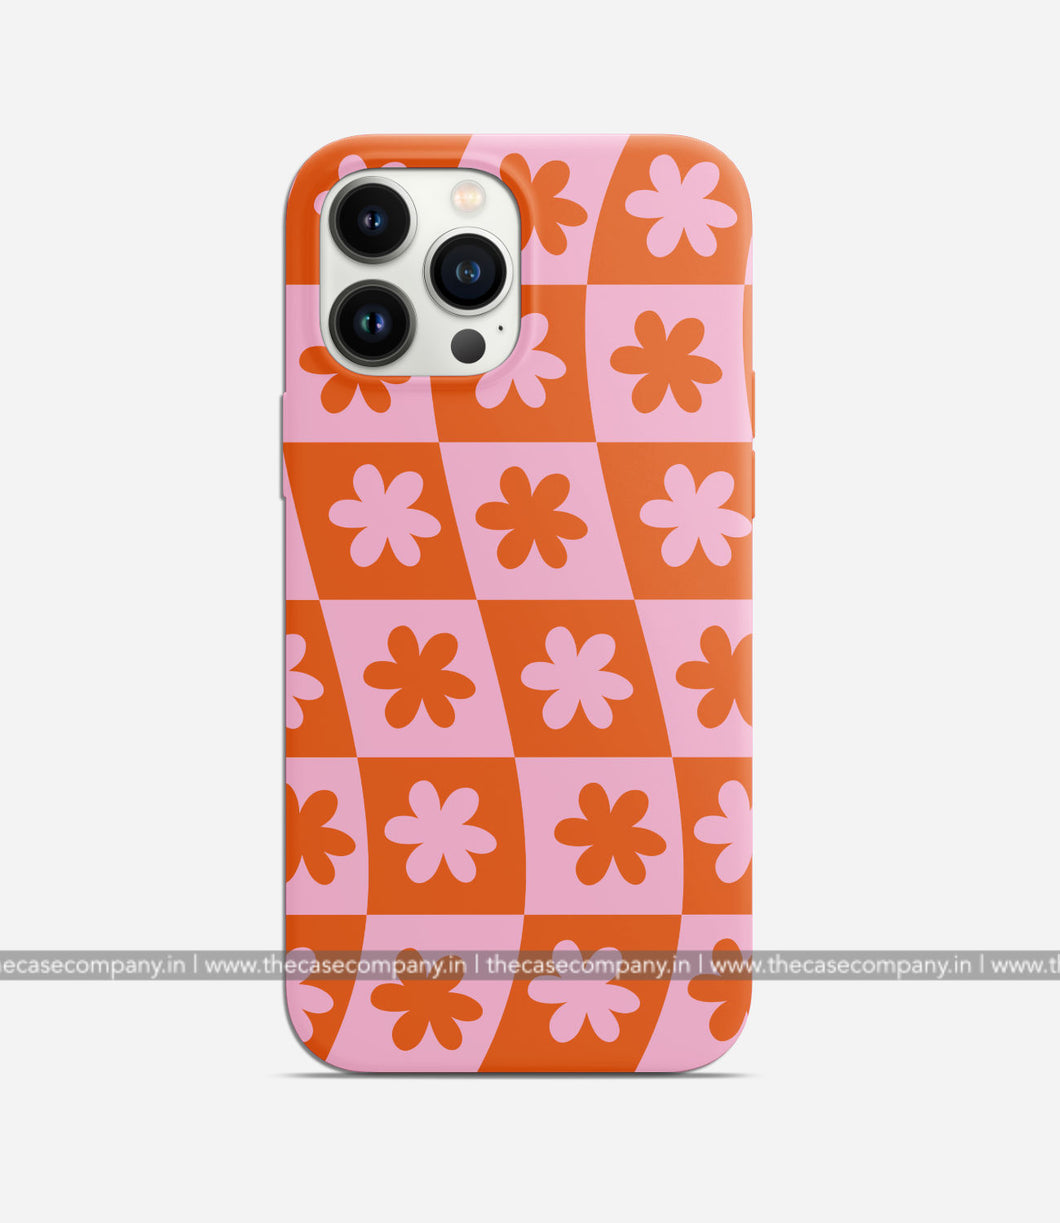 Melted Psychedelic Groovy Checkered Case